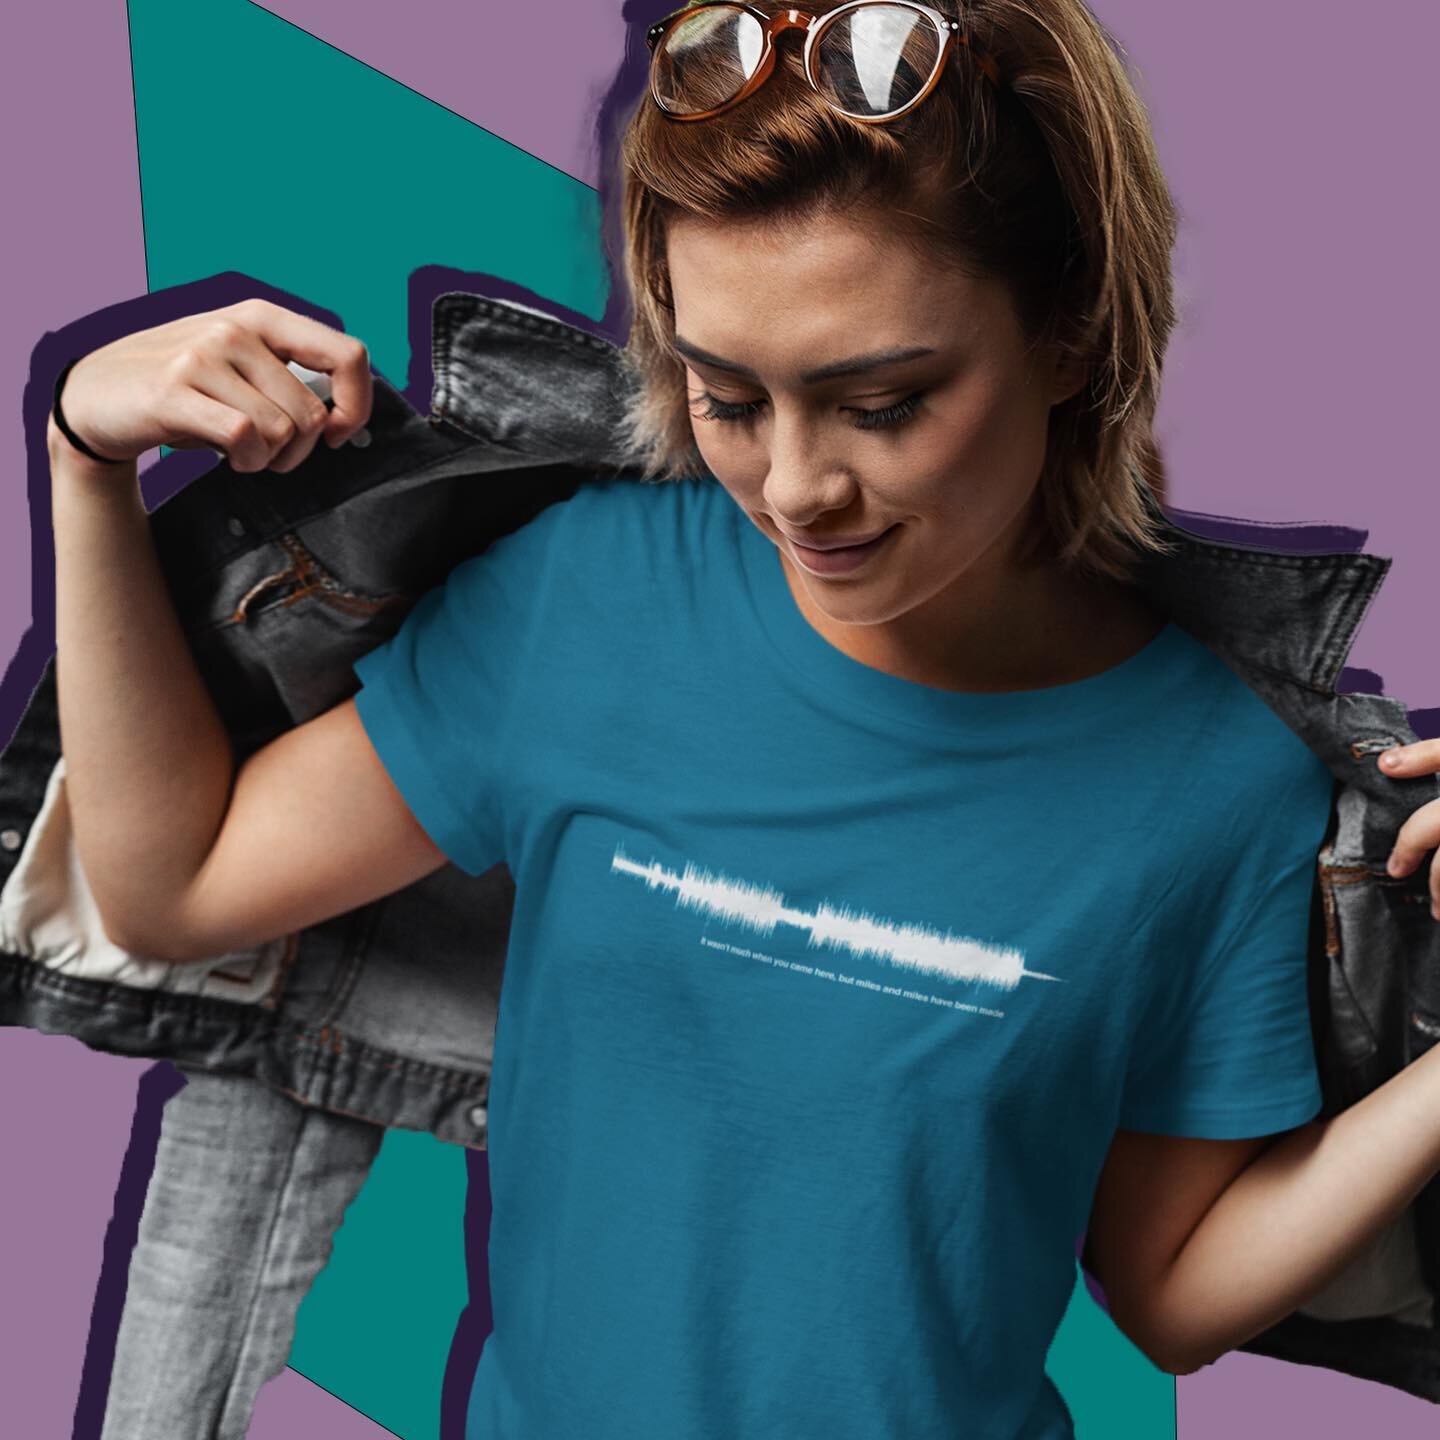 Deep Teal Unisex Miles and Miles Waveform shirt $25
.
Free pickup @artboutiki if you&rsquo;re local 
Link in bio - gwabn.com/store